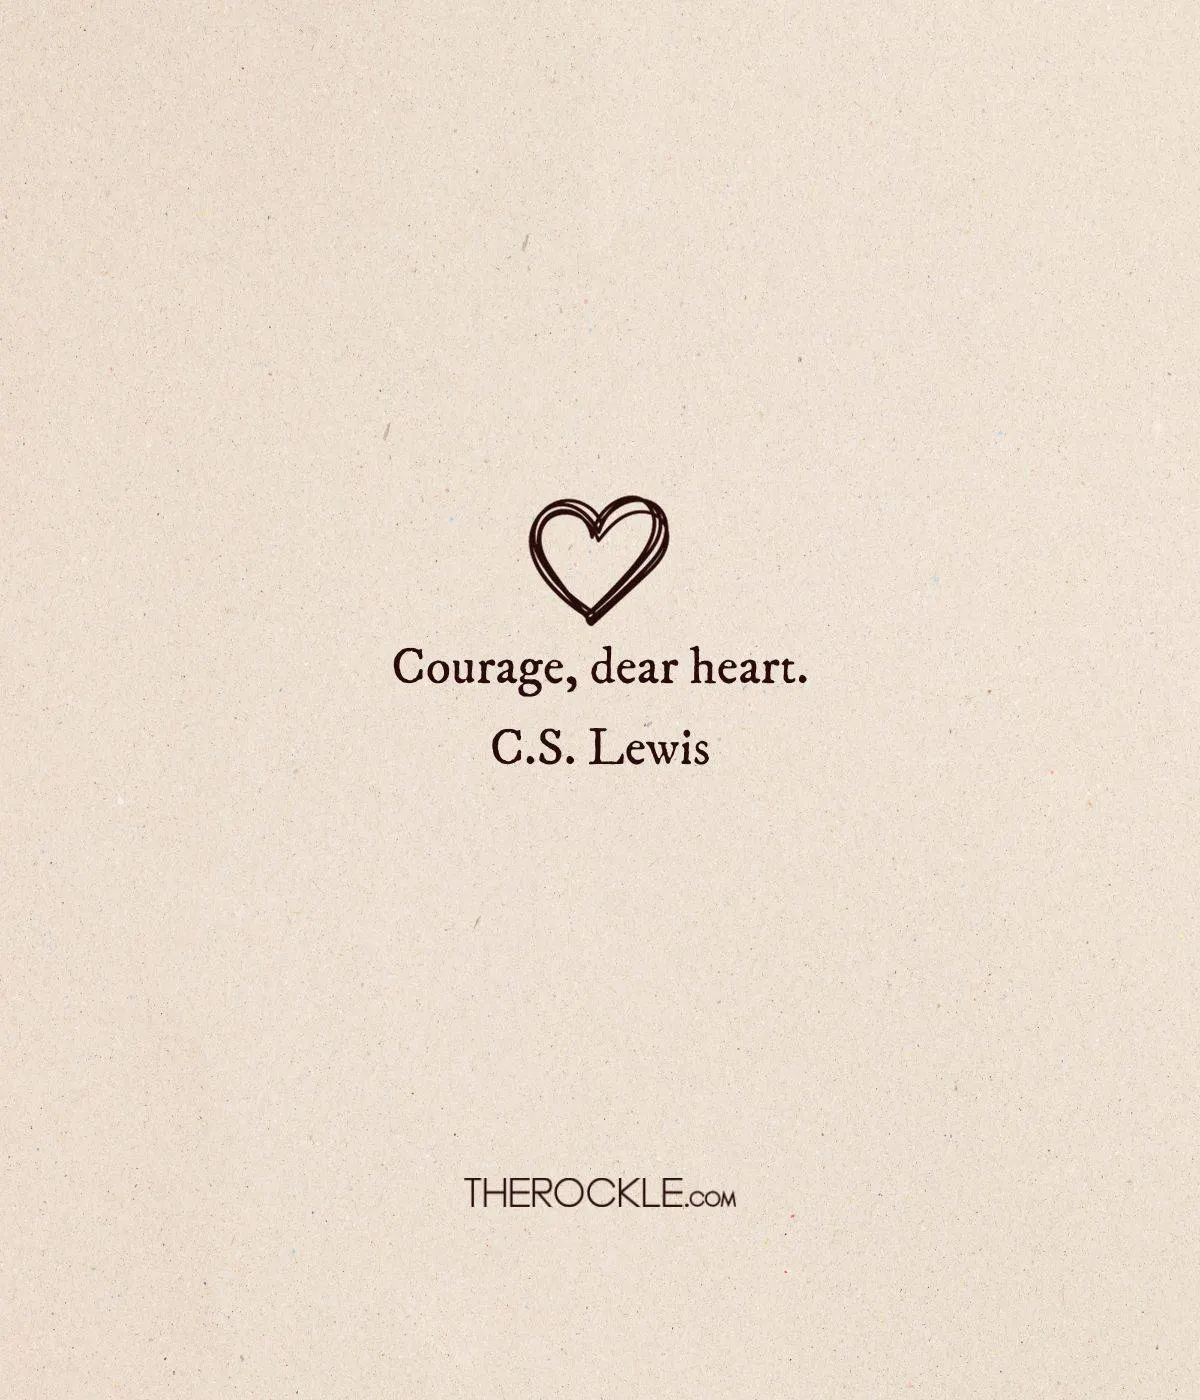 C.S. Lewis quote about courage